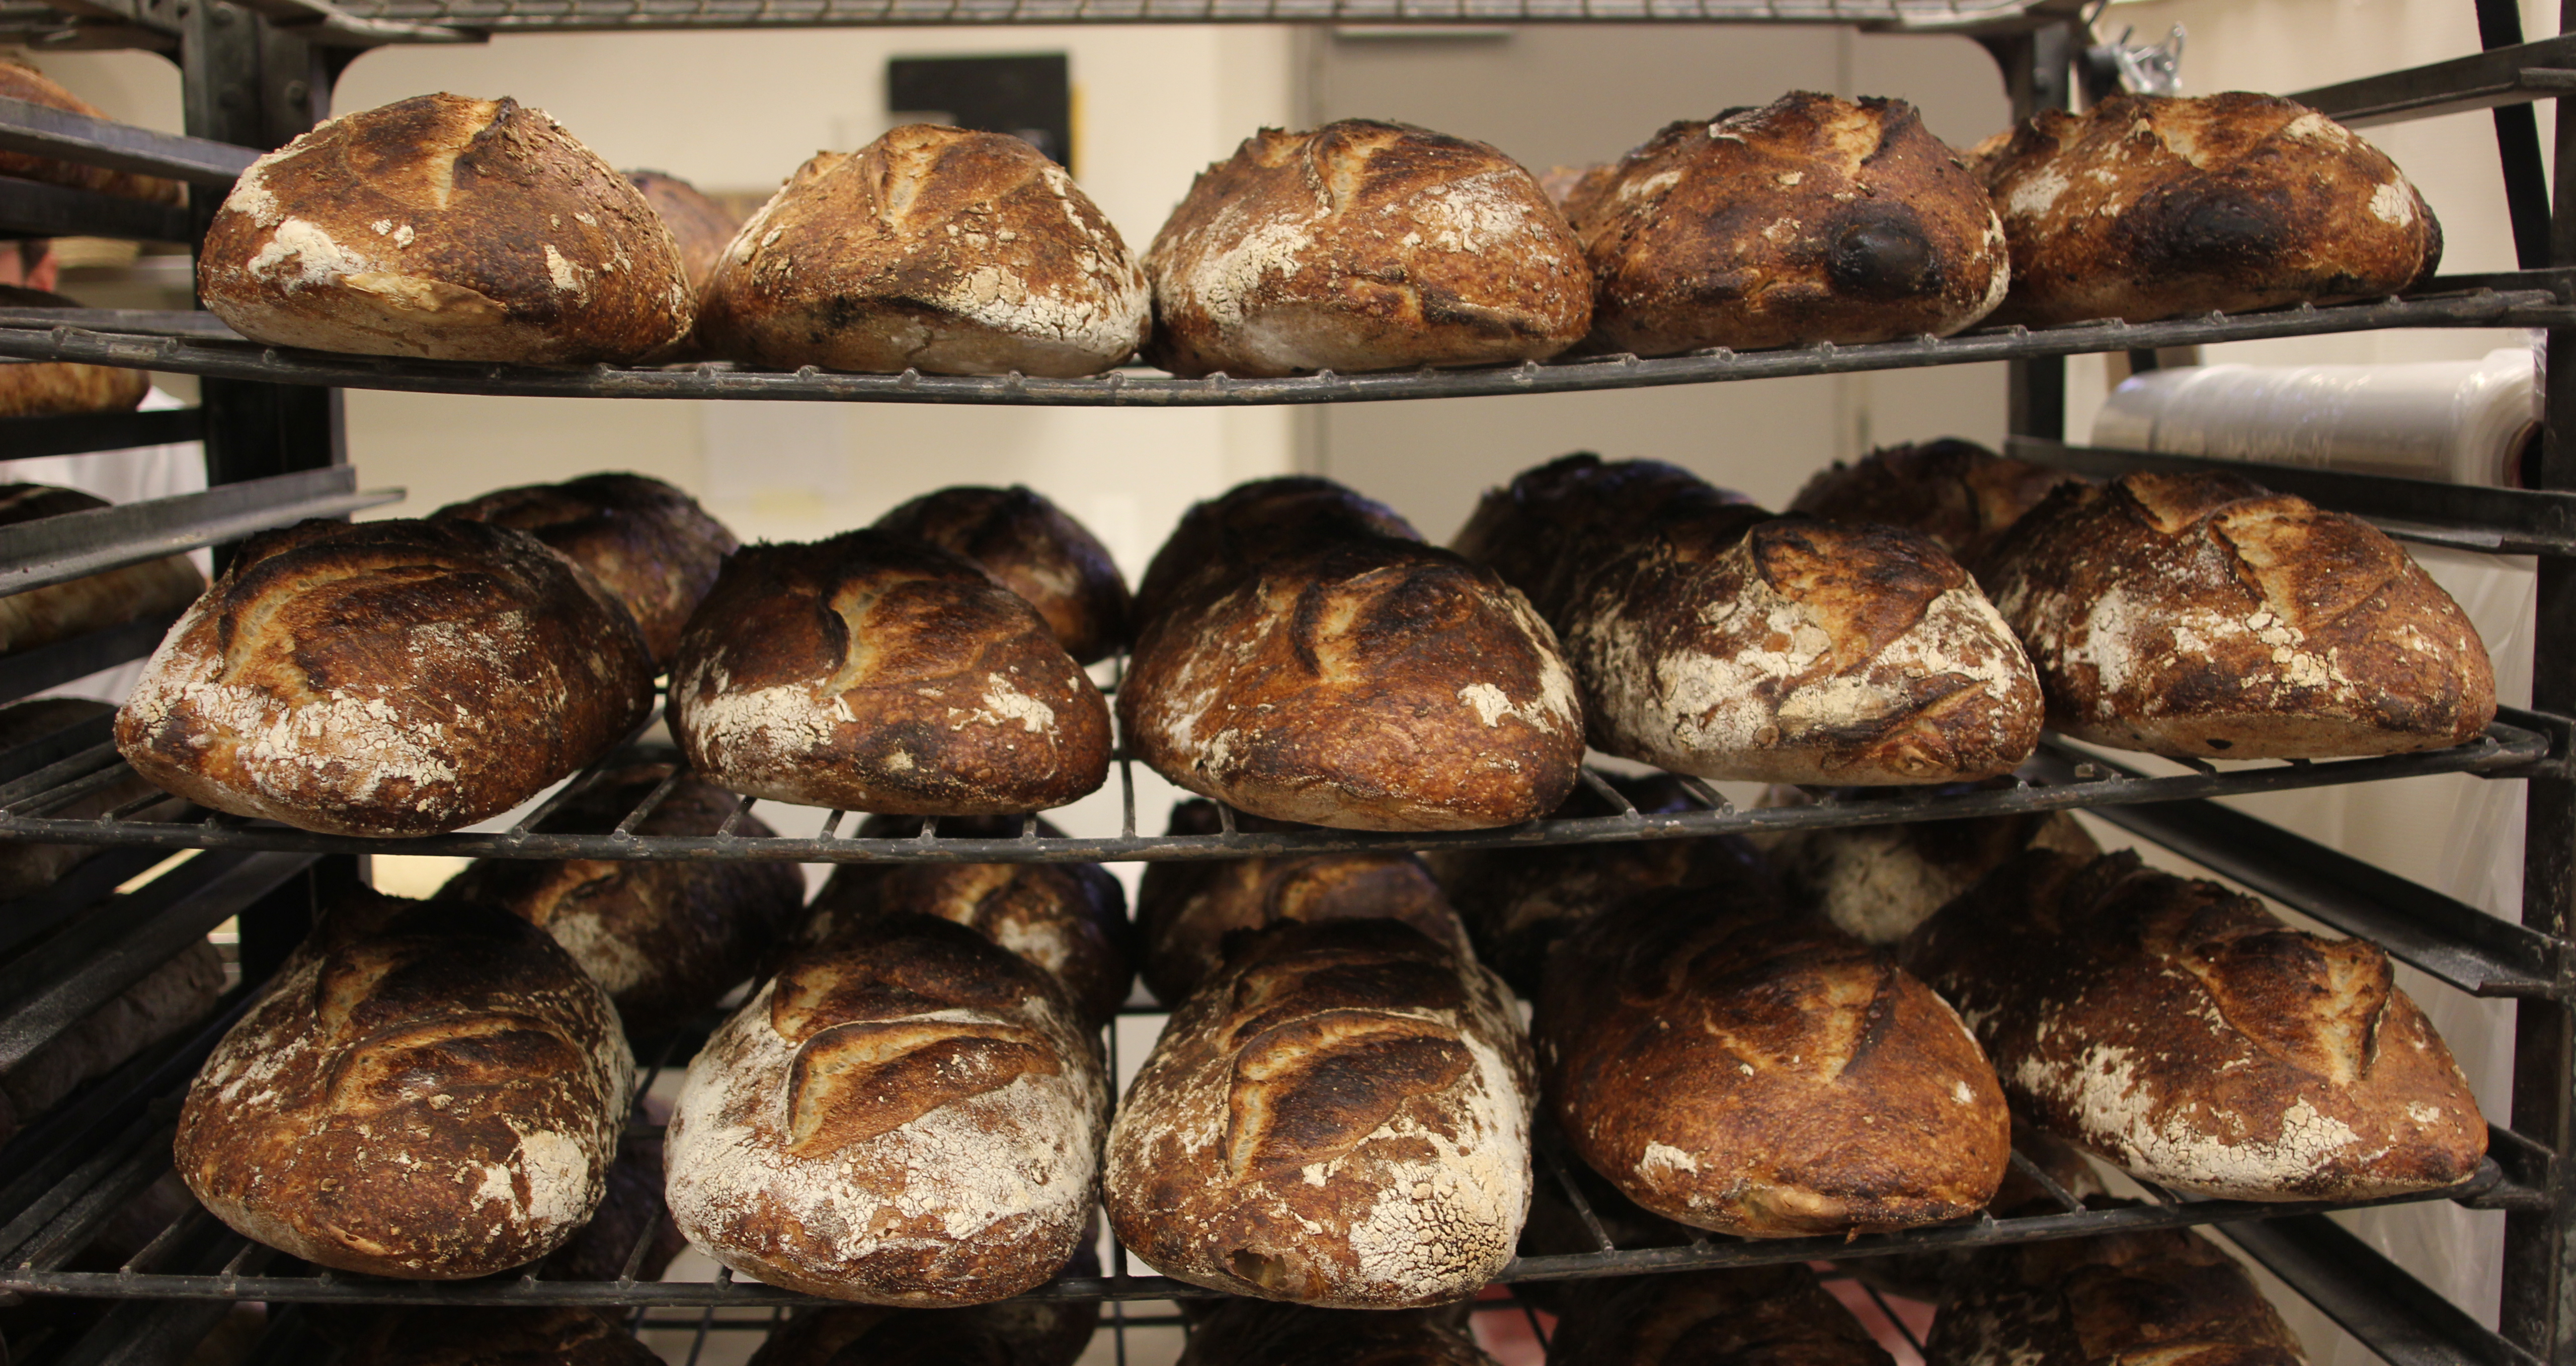 KNOW YOUR BREAD, WITH PUBLICAN QUALITY BREAD BAKER GREG WADE